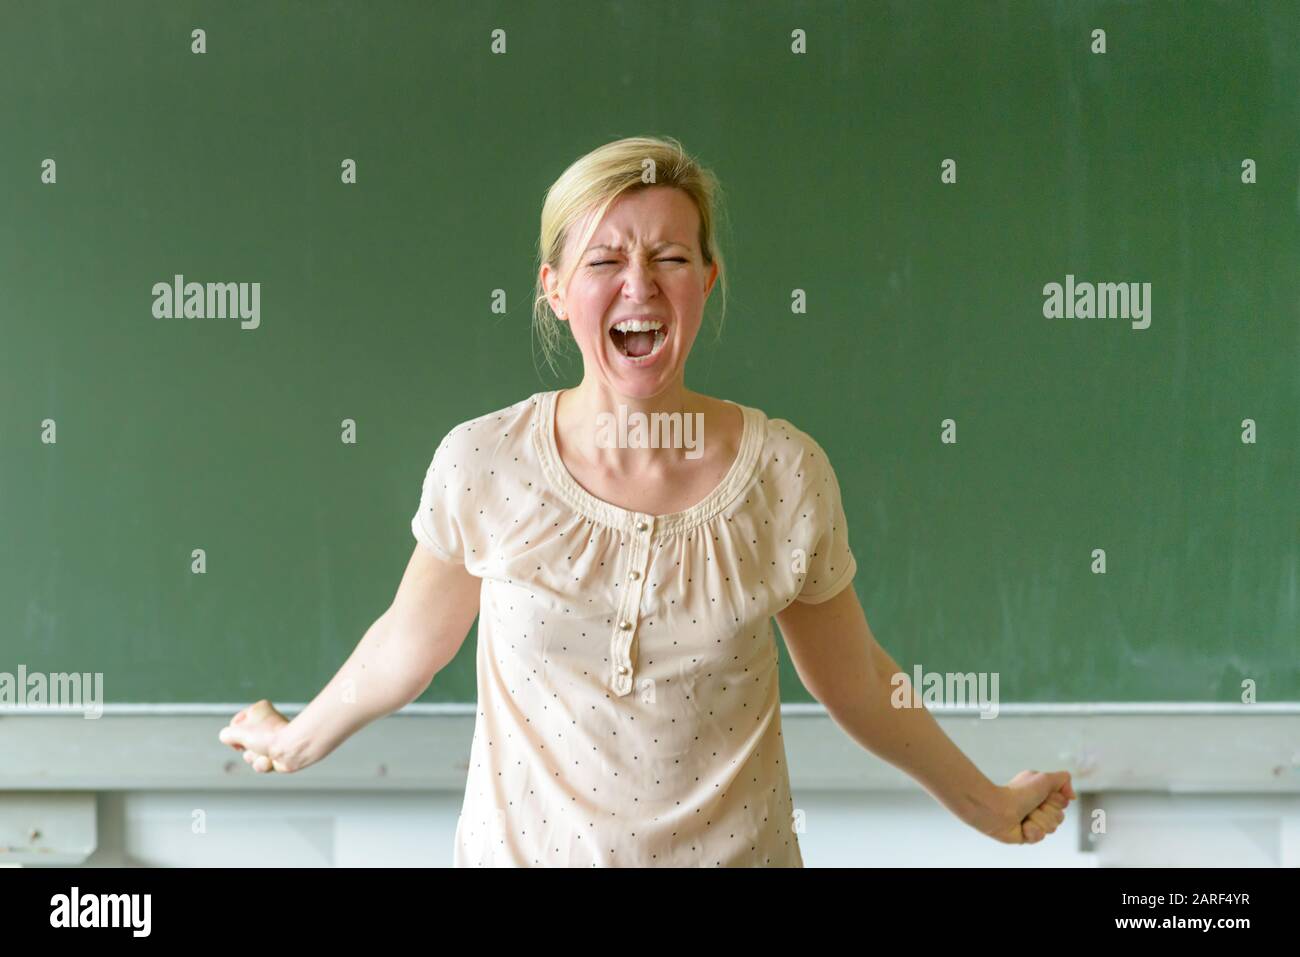 Emotional angry female school teacher yelling at her class while clenching her fists in a show of temper in front of a chalkboard Stock Photo